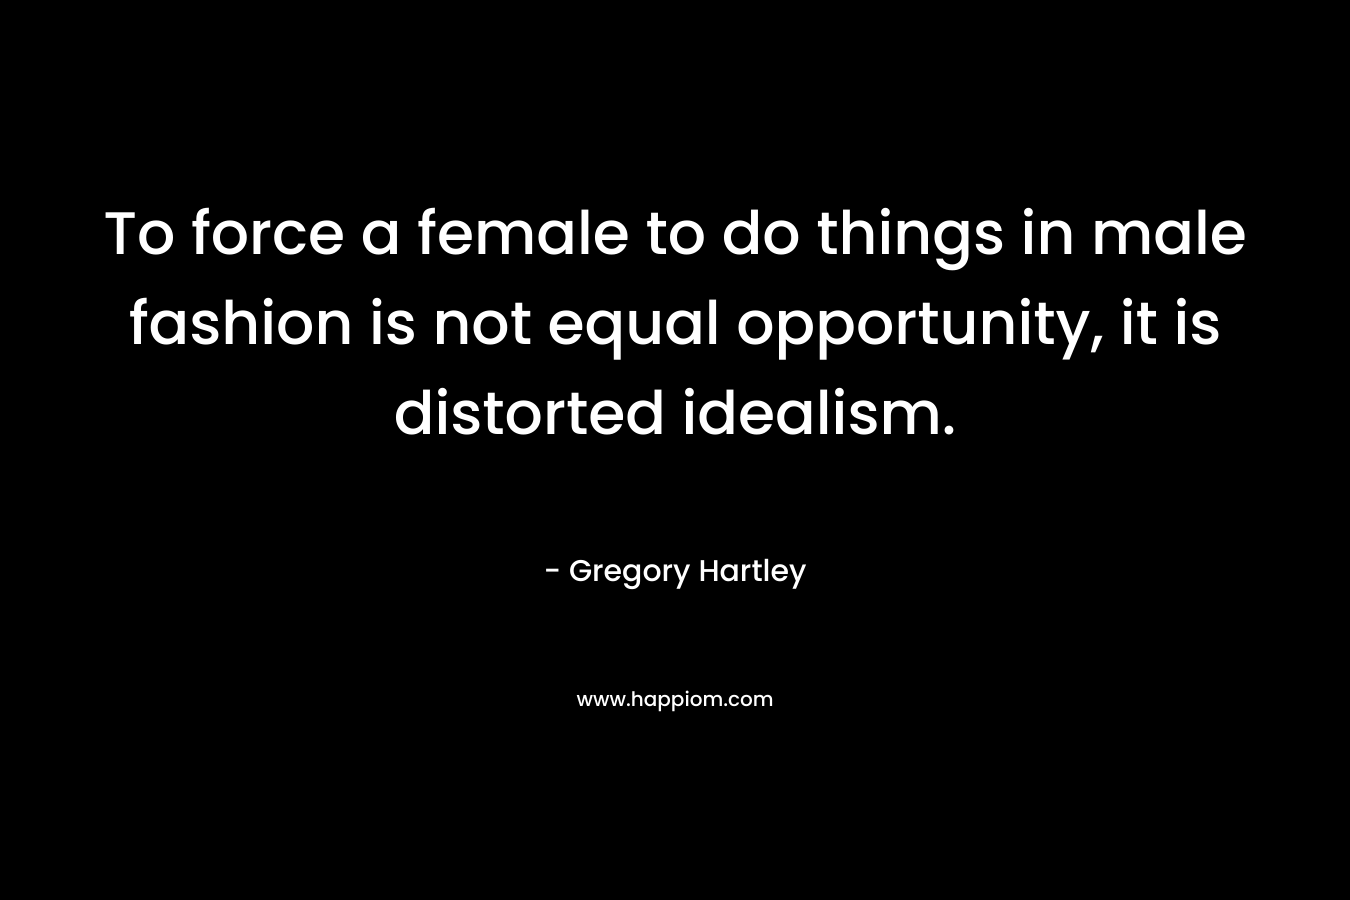 To force a female to do things in male fashion is not equal opportunity, it is distorted idealism.